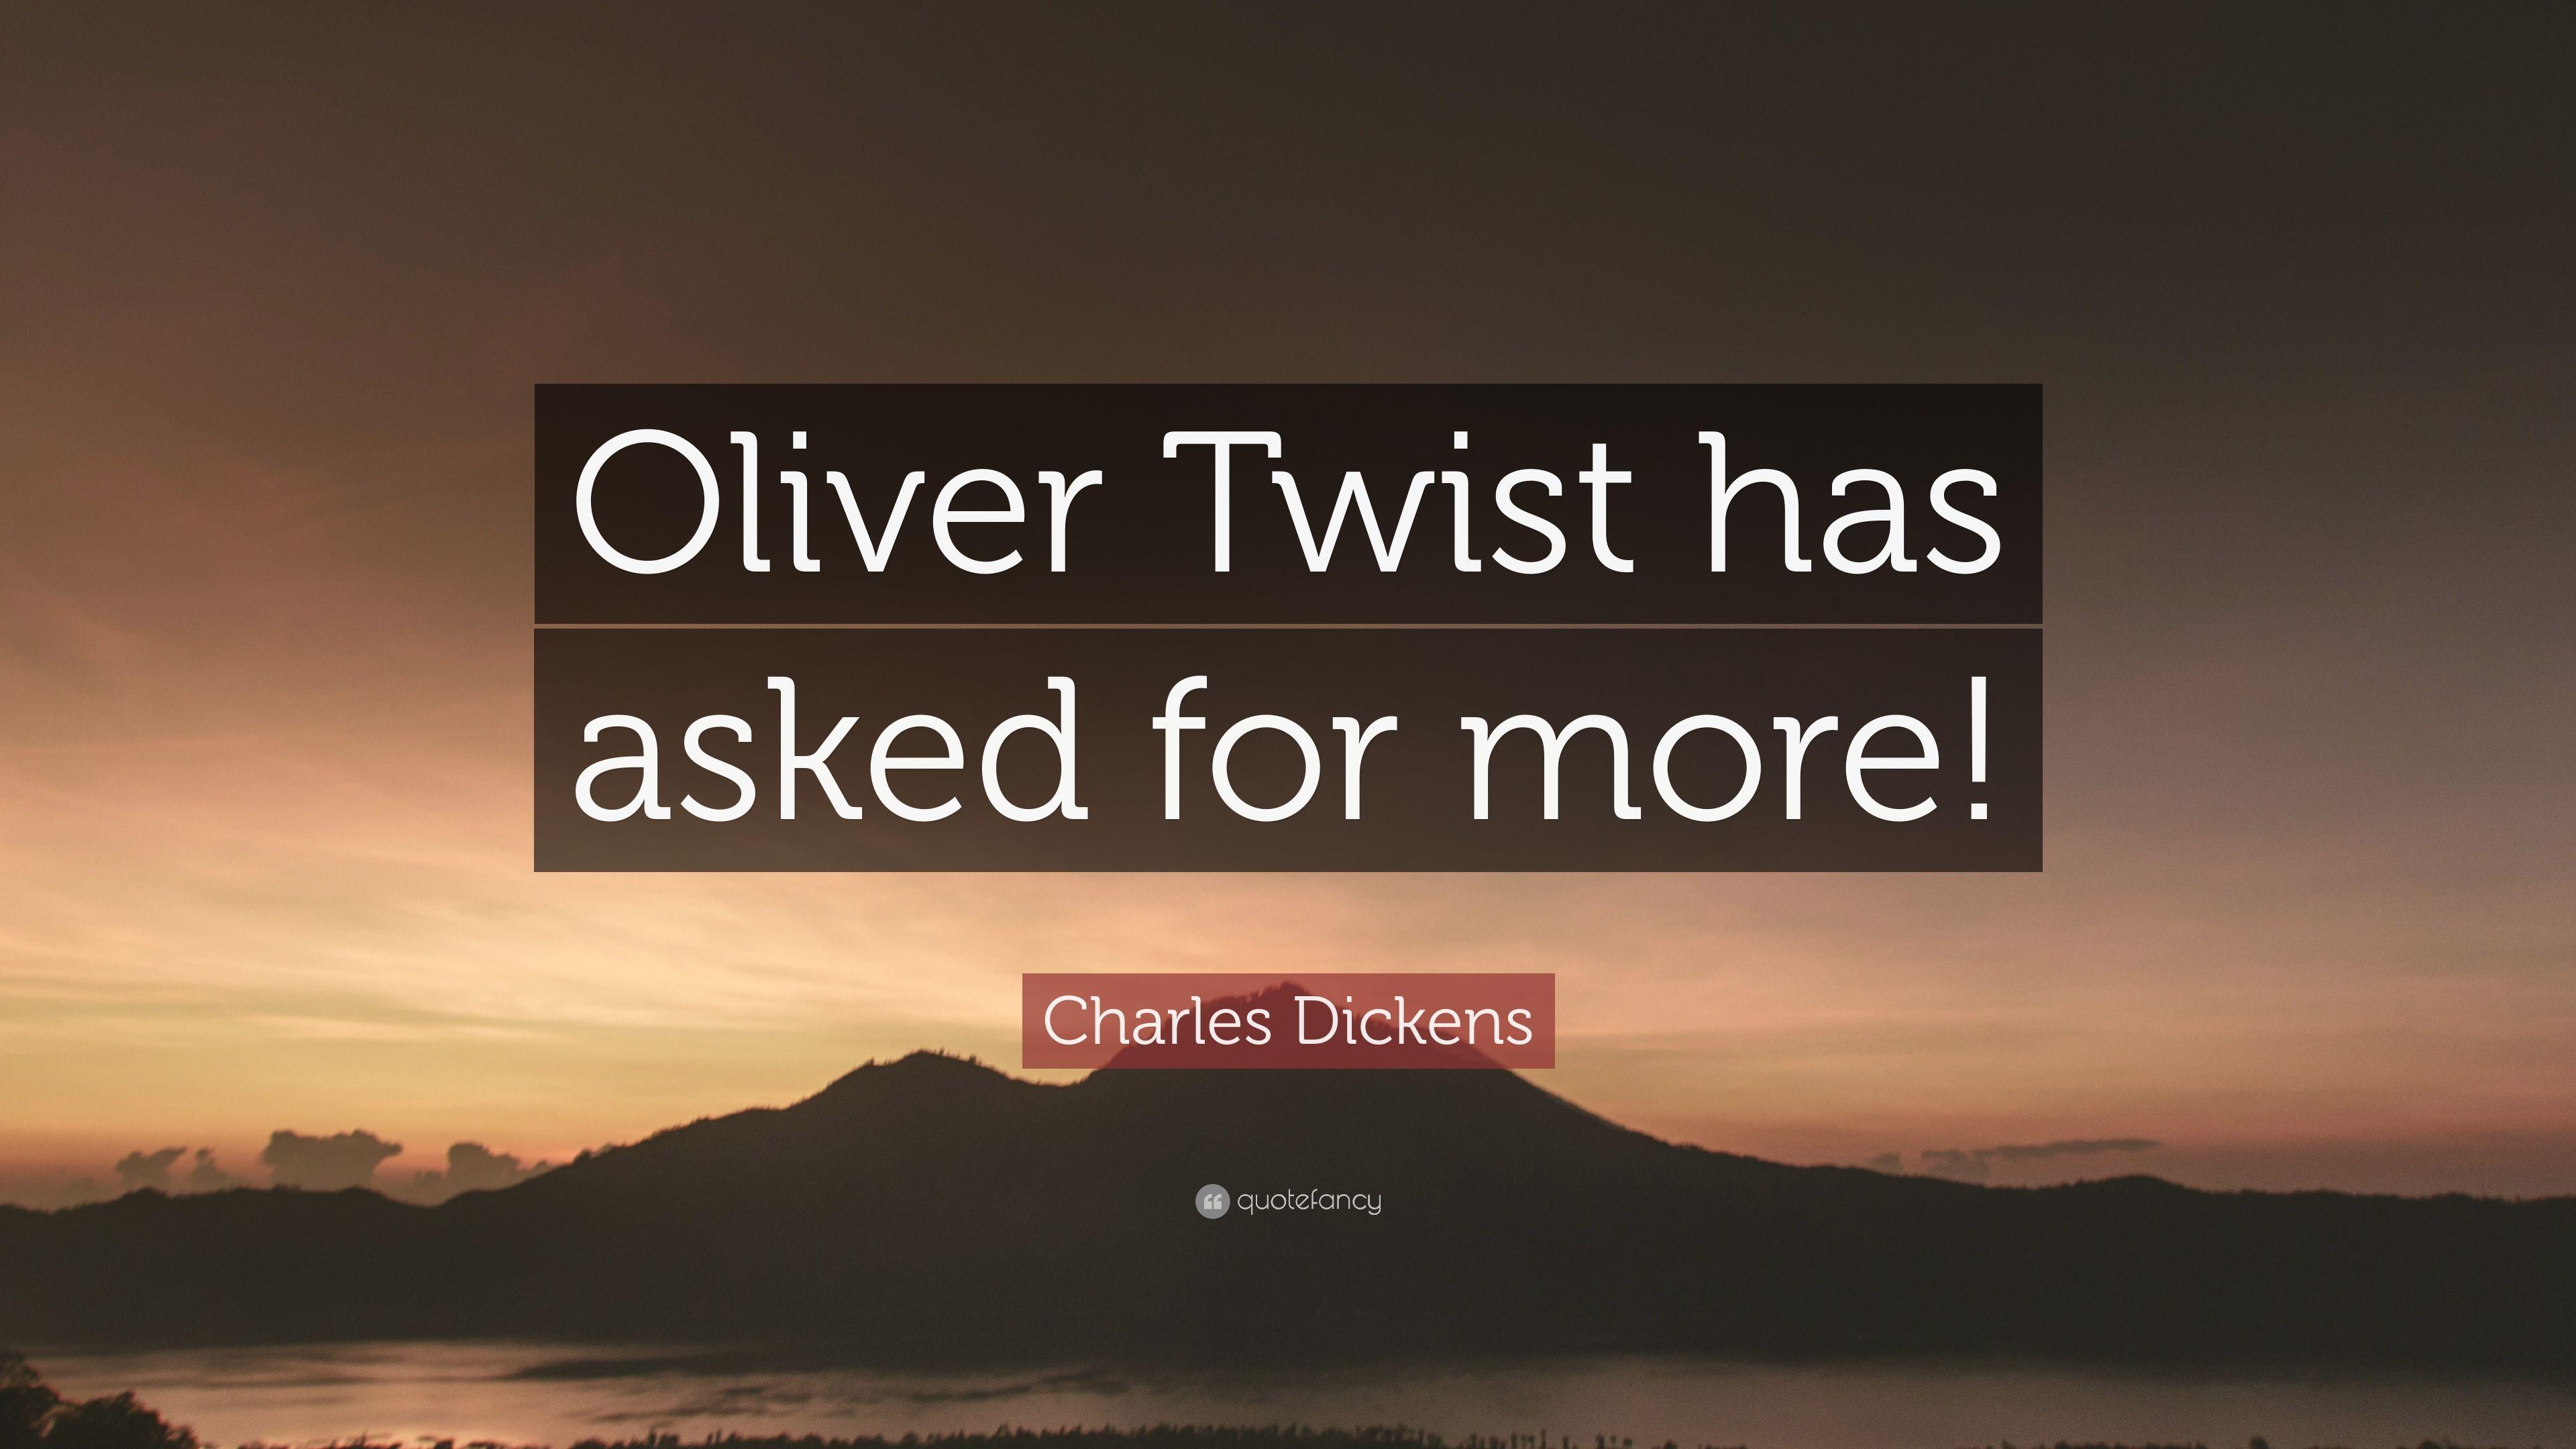 Charles Dickens Quote: “Oliver Twist has asked for more!” 7